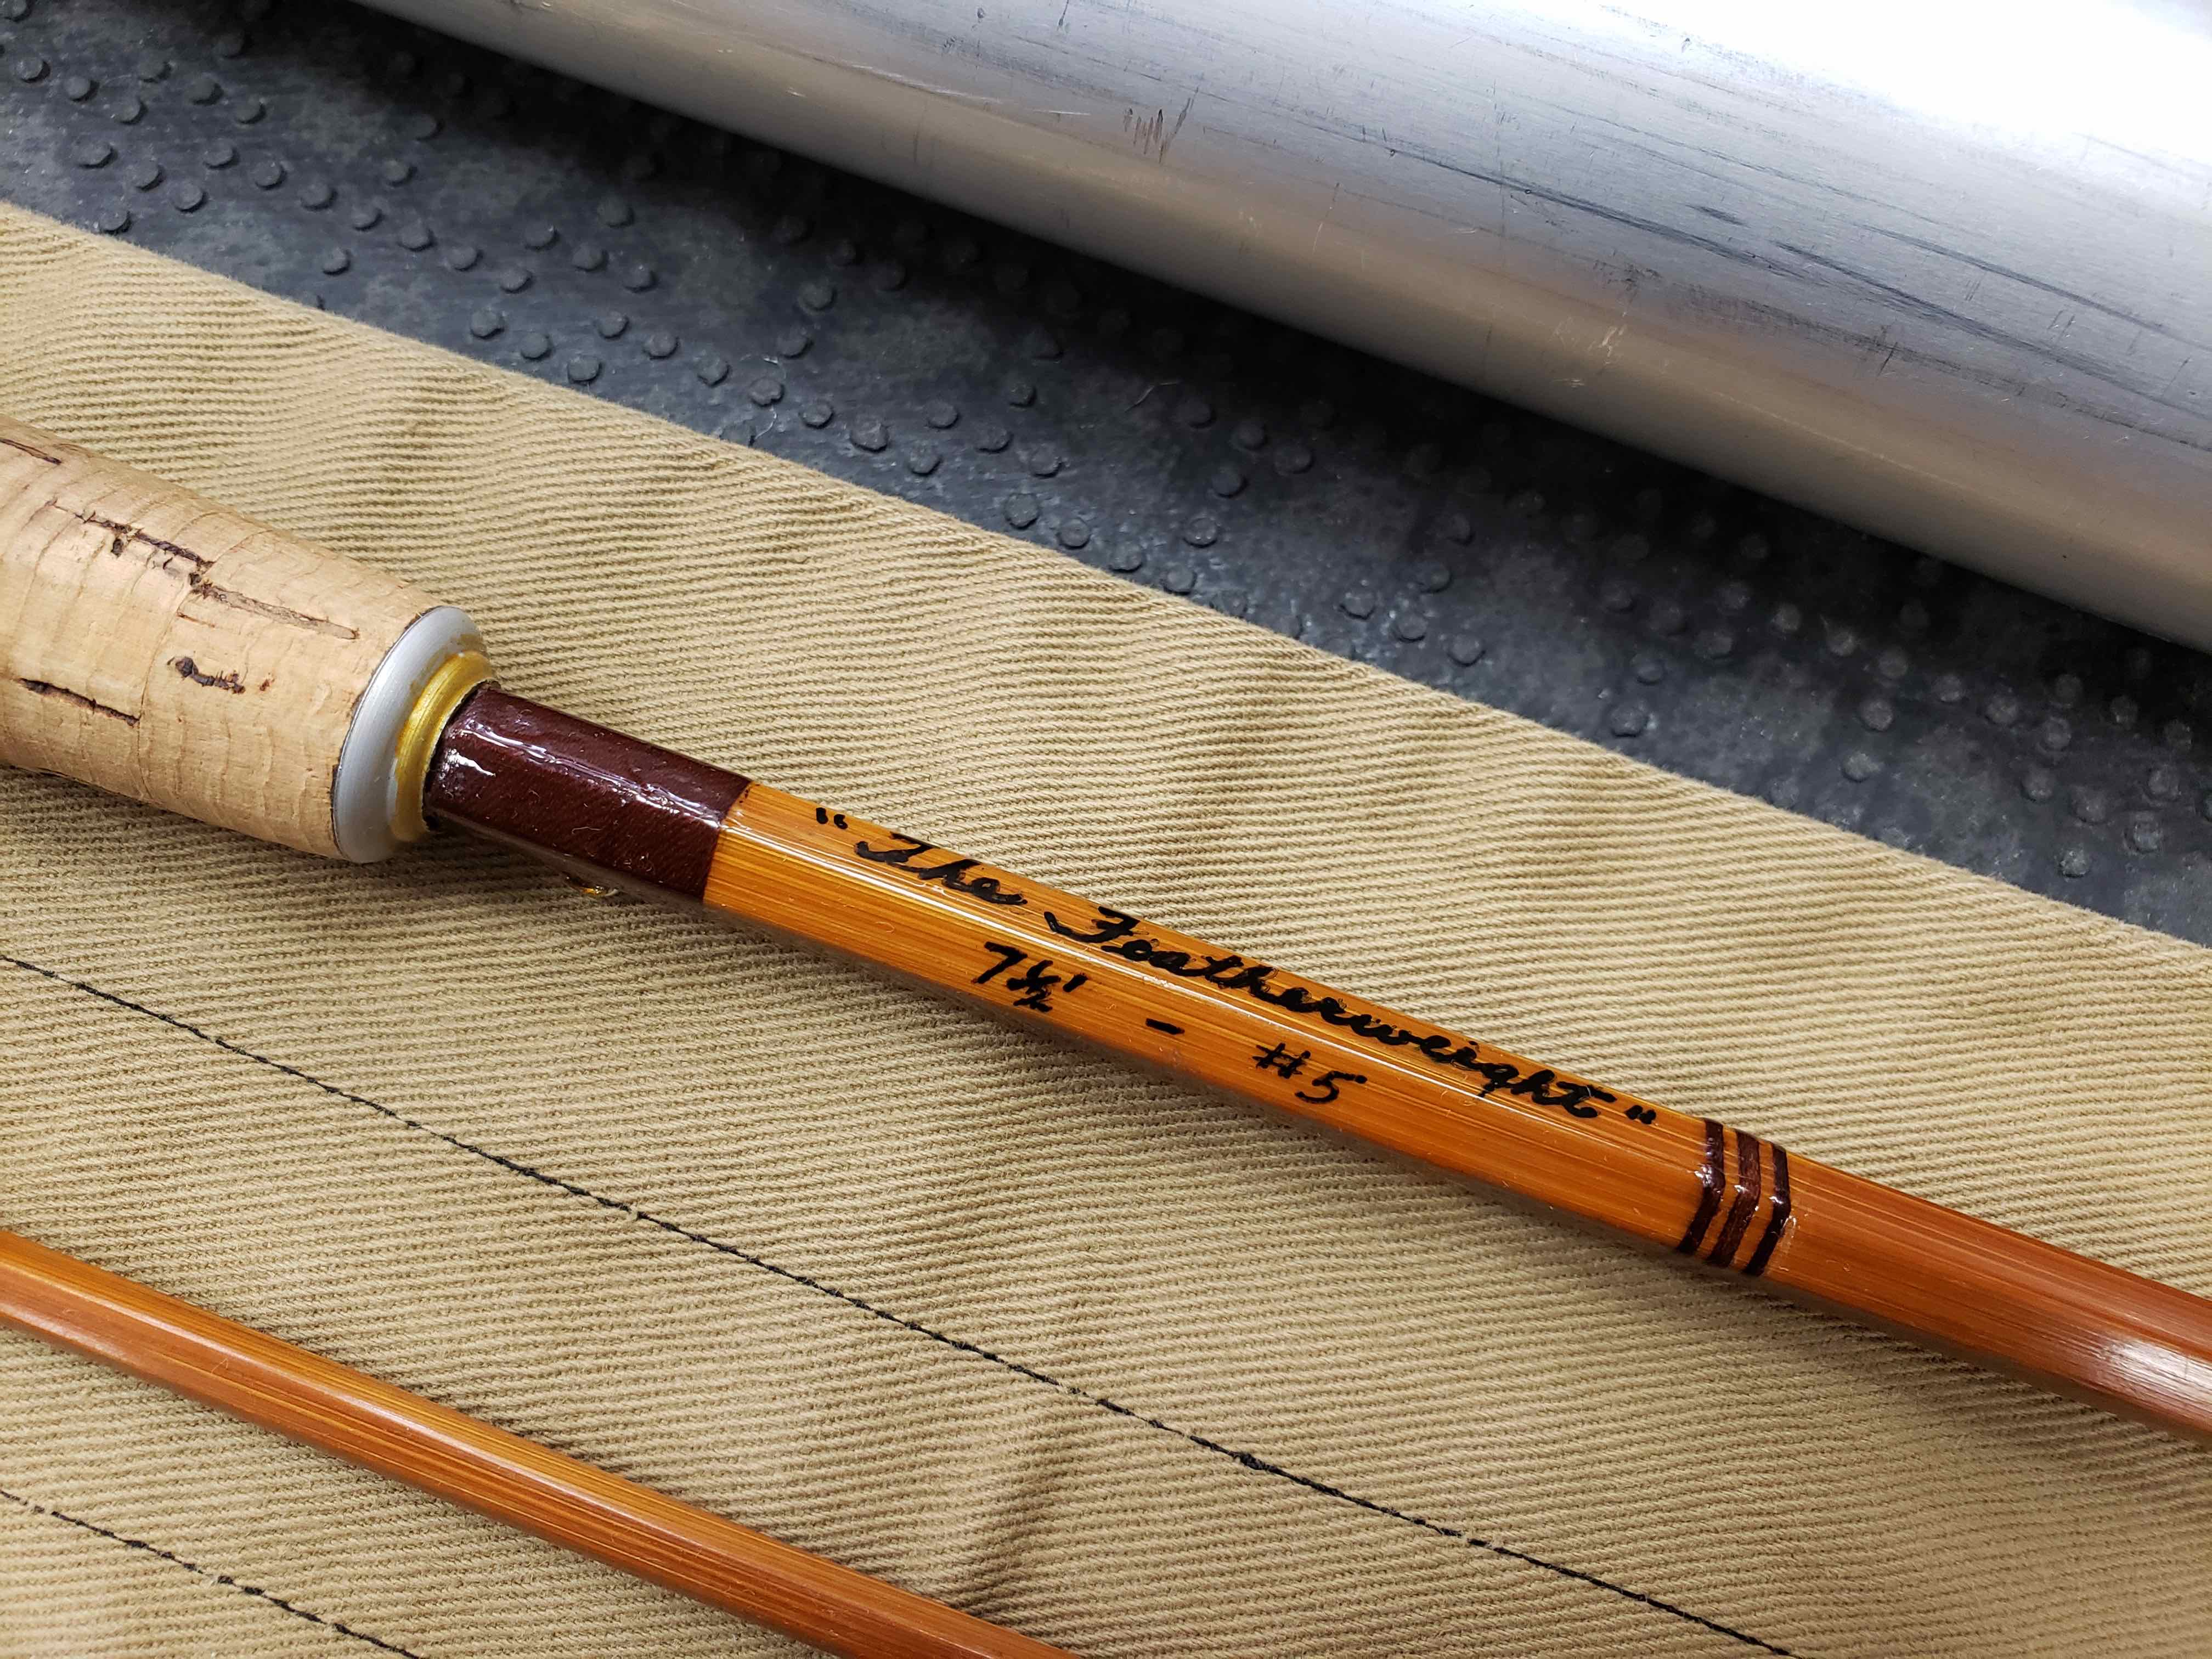 Sharpe Aberdeen Bamboo Fly Rod - "The Featherweight” - 2Pc - 7 1/2' - 5WT- GREAT SHAPE!